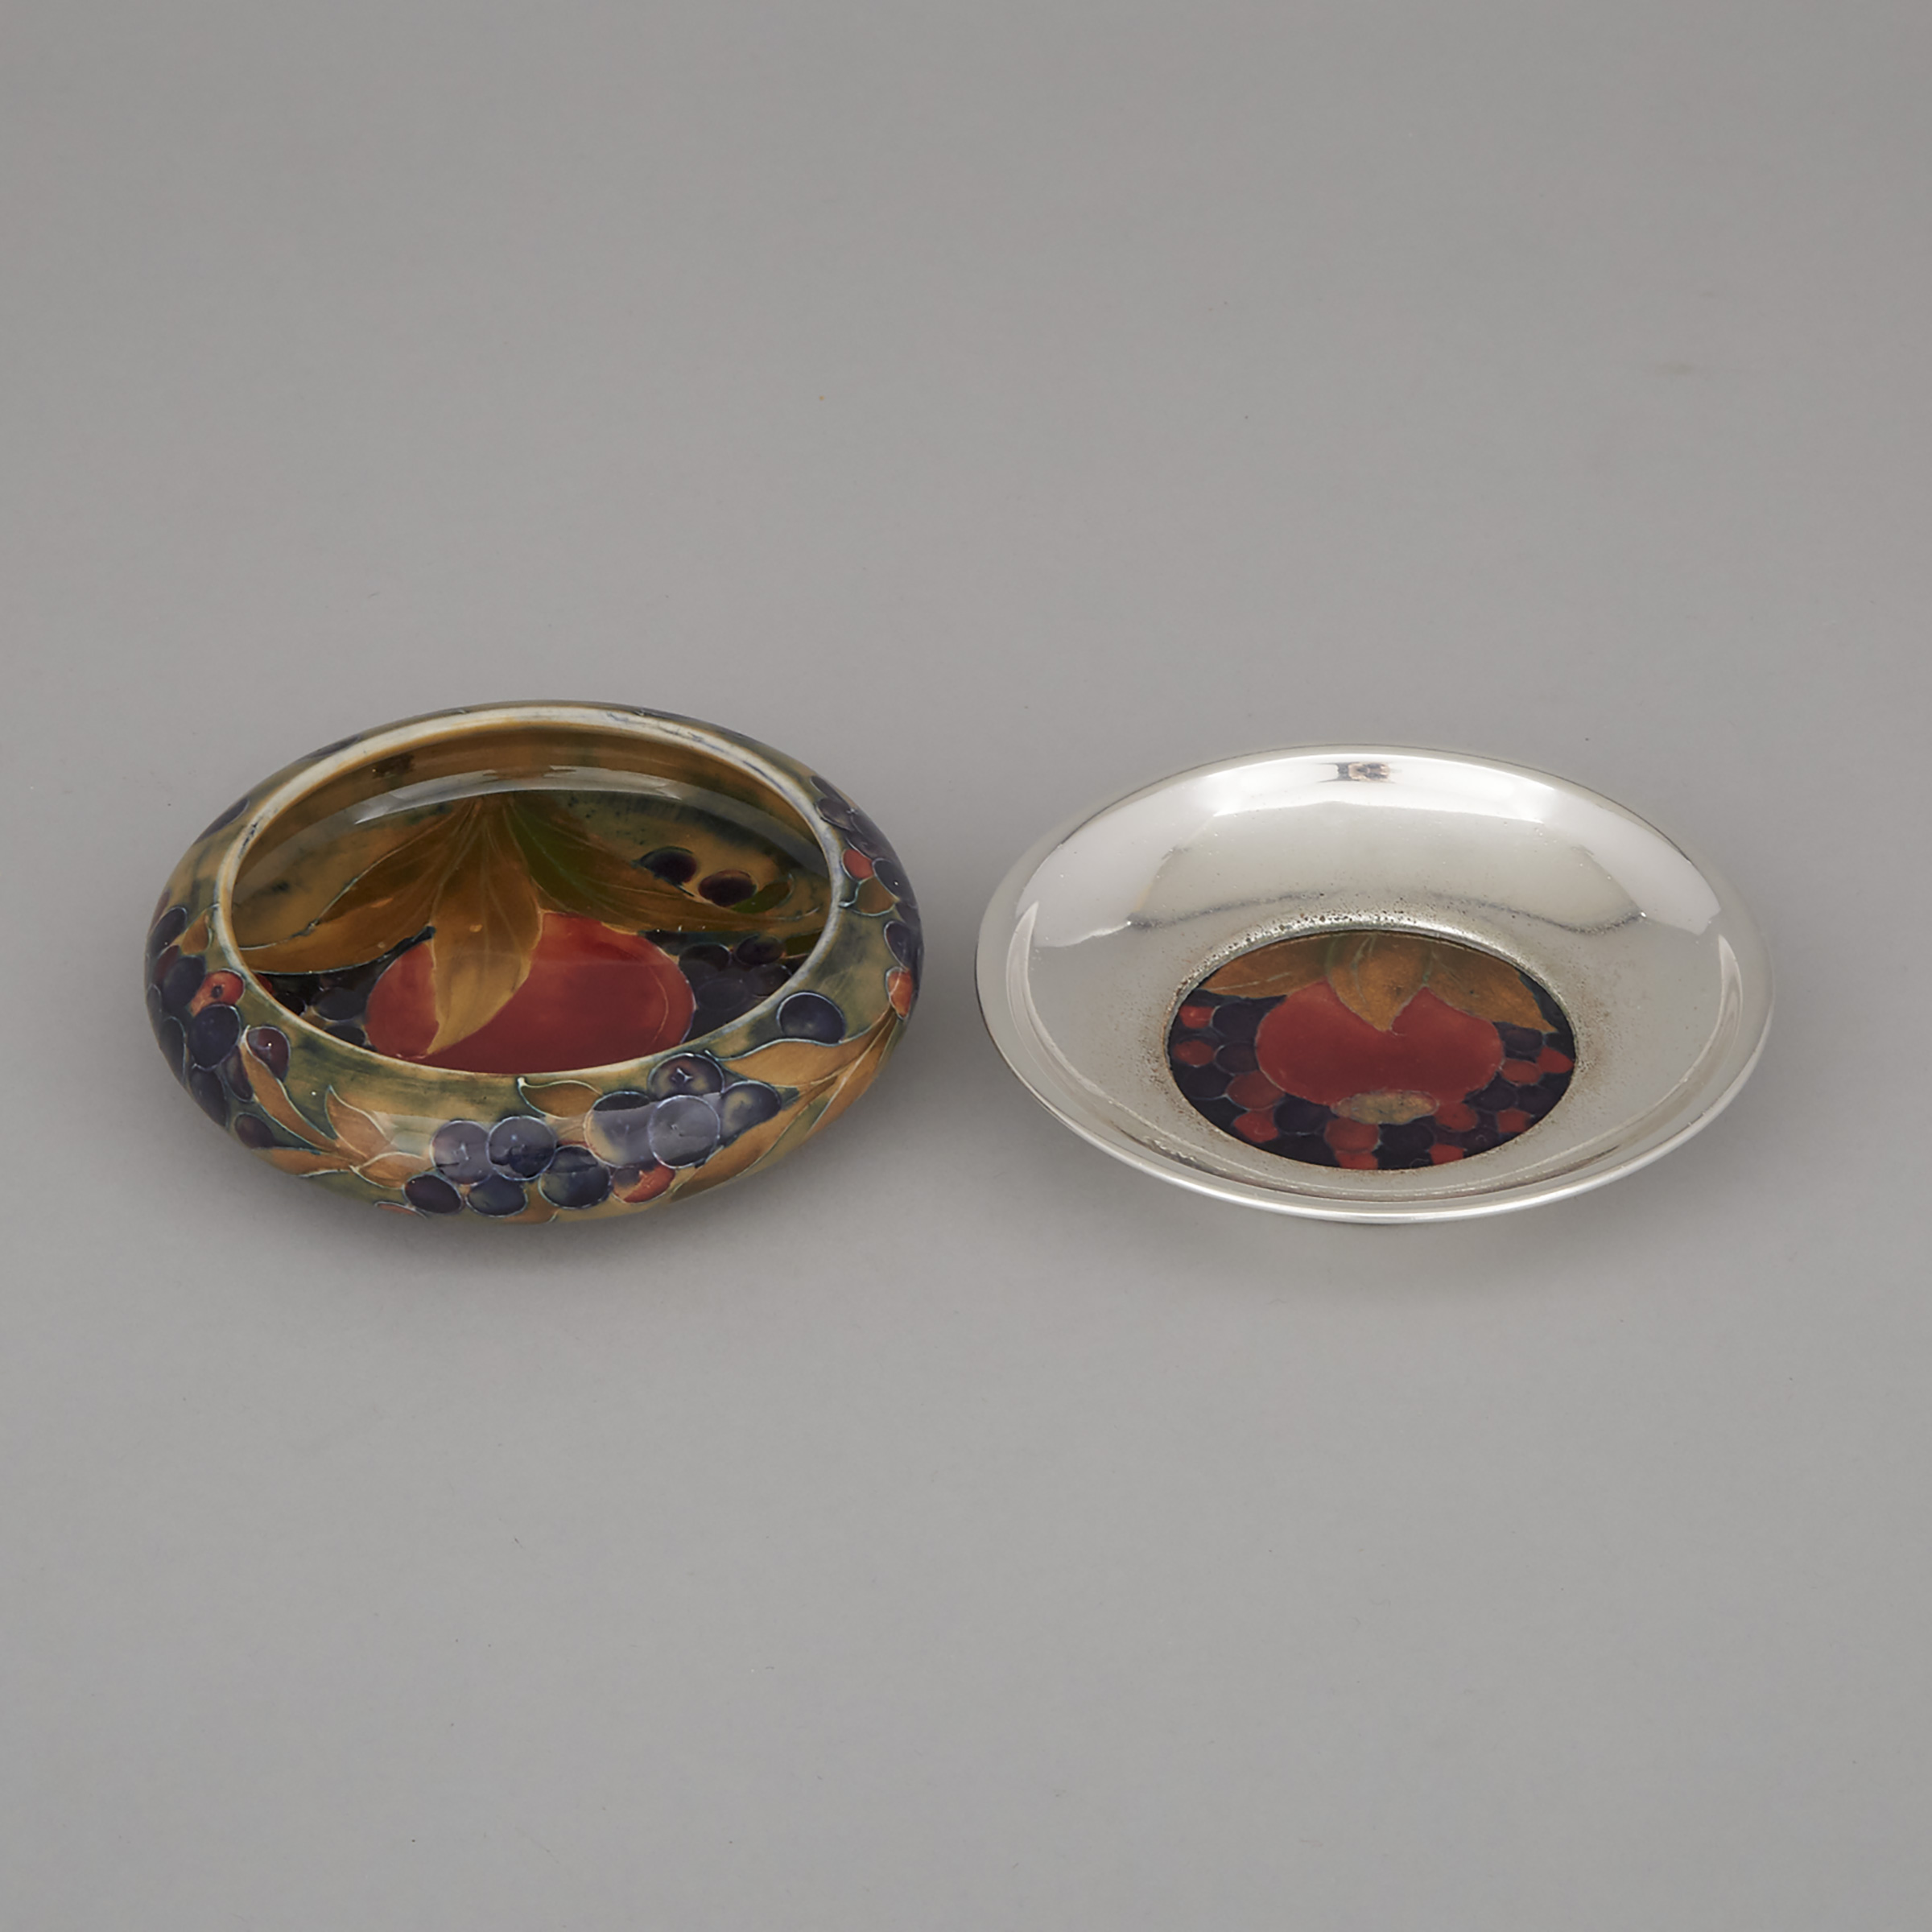 Macintyre Moorcroft Small Pomegranate Dish and Another with Silvered Metal Mount, c.1912/30